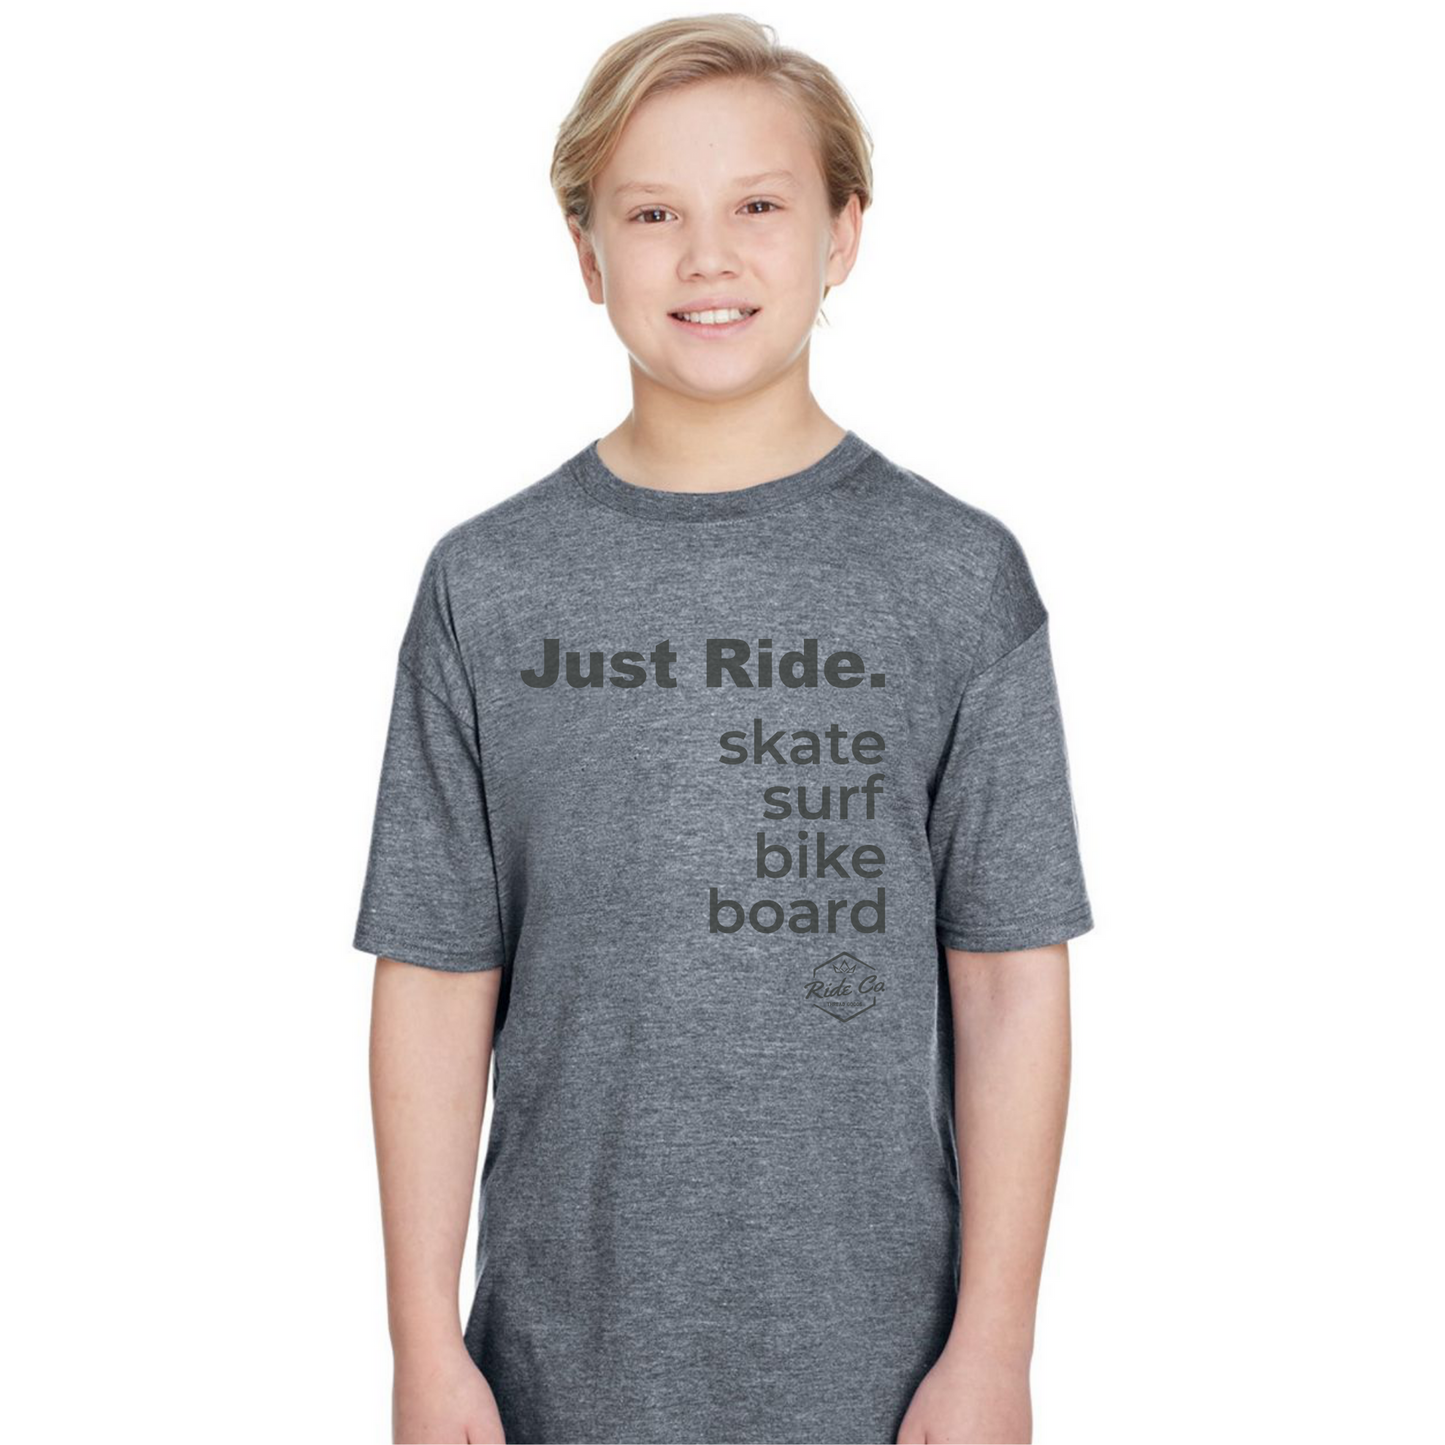 Ride Co. Just Ride. Youth Tee